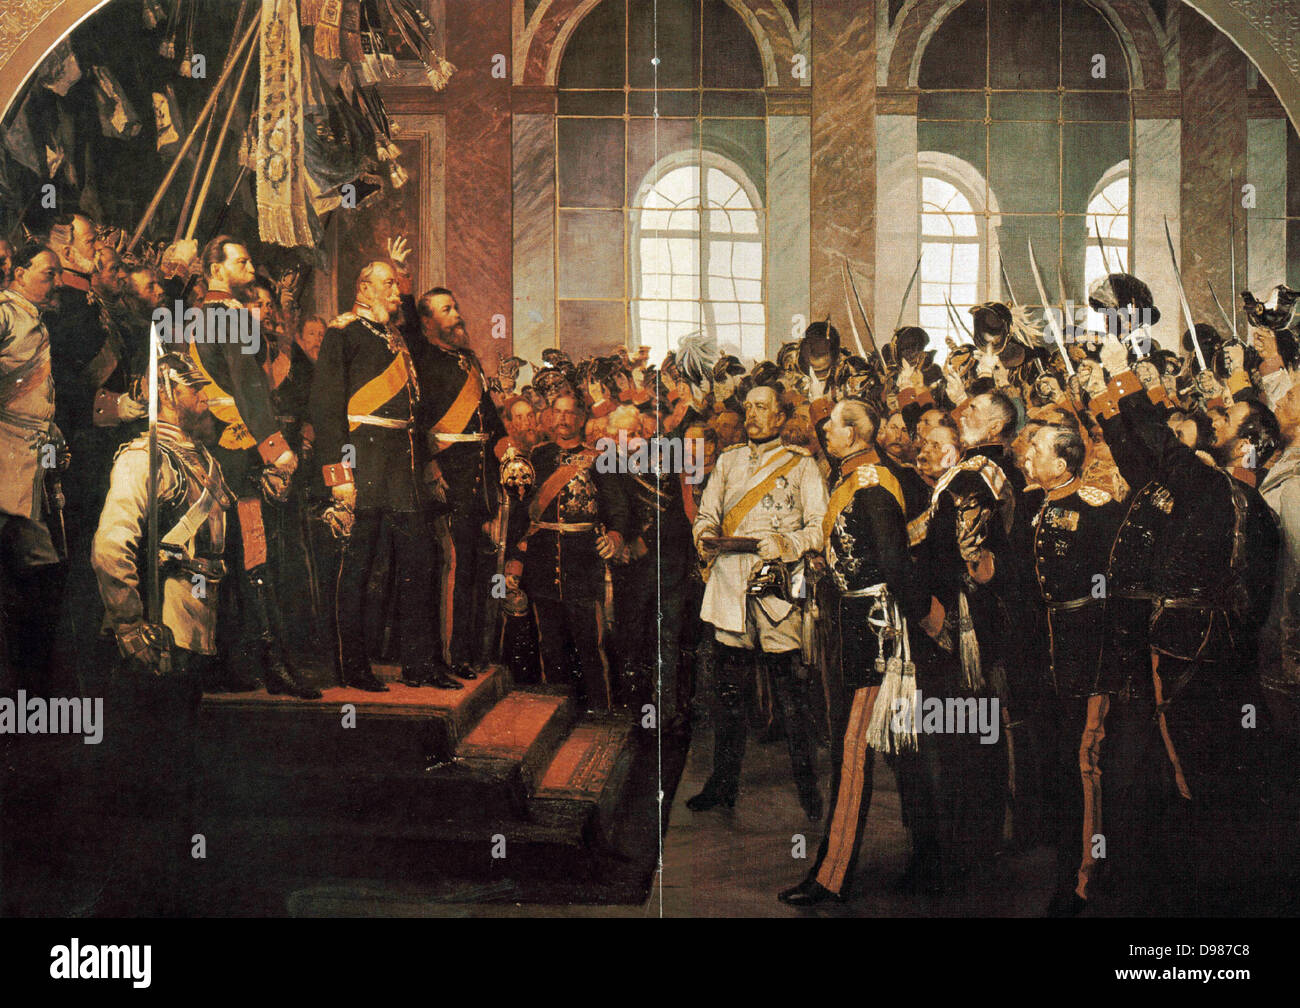 Wilhelm I (1859-1888) King of Prussia from 1861, being proclaimed first Emperor of Germany, 1871. After the defeat of France in the Franco-Prussian War of 1870-1871, as a gesture of further humiliation of the French, on 18 January 1871 Wilhelm was crowned in the Hall of Mirrors at Versailles. the palace built by Louis XIV. Otto von Bismarck, German Chancellor, in which coat in centre. Stock Photo